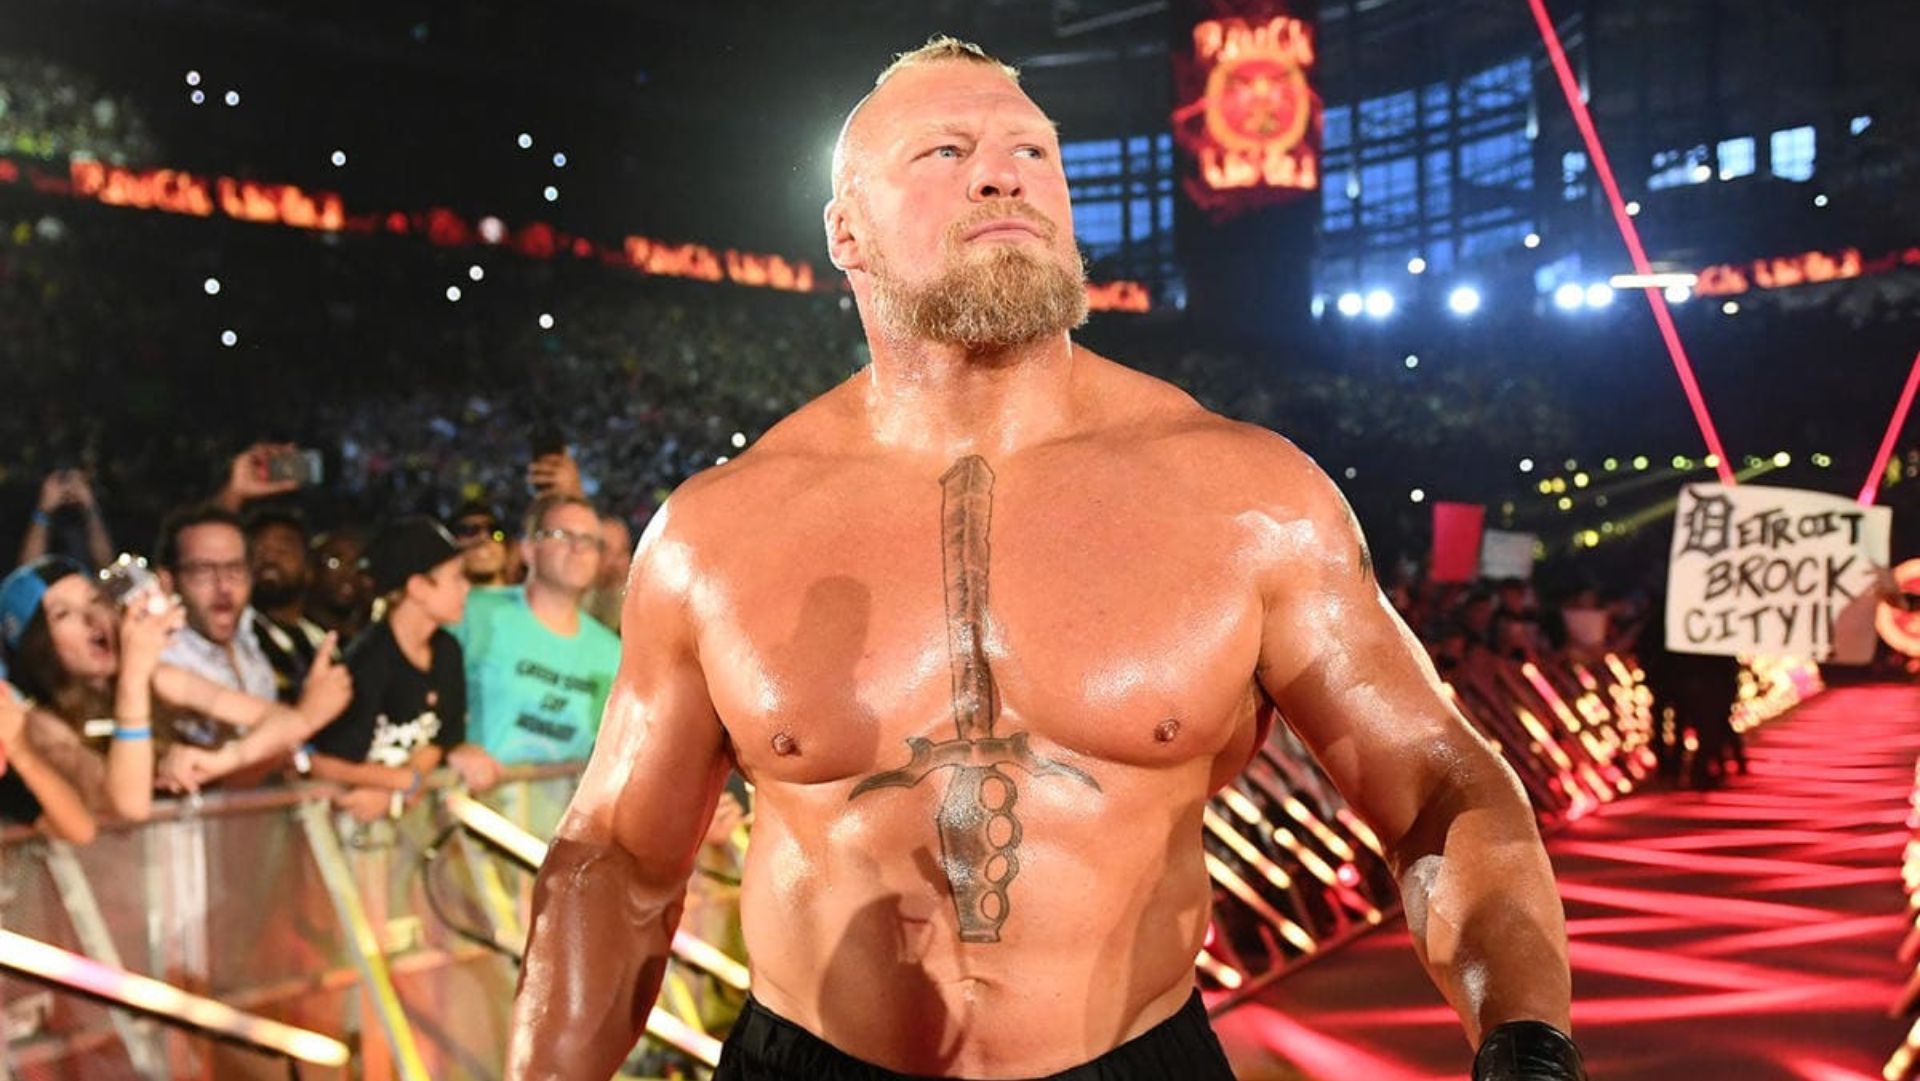 Brock Lesnar is the highest paid WWE Superstar.